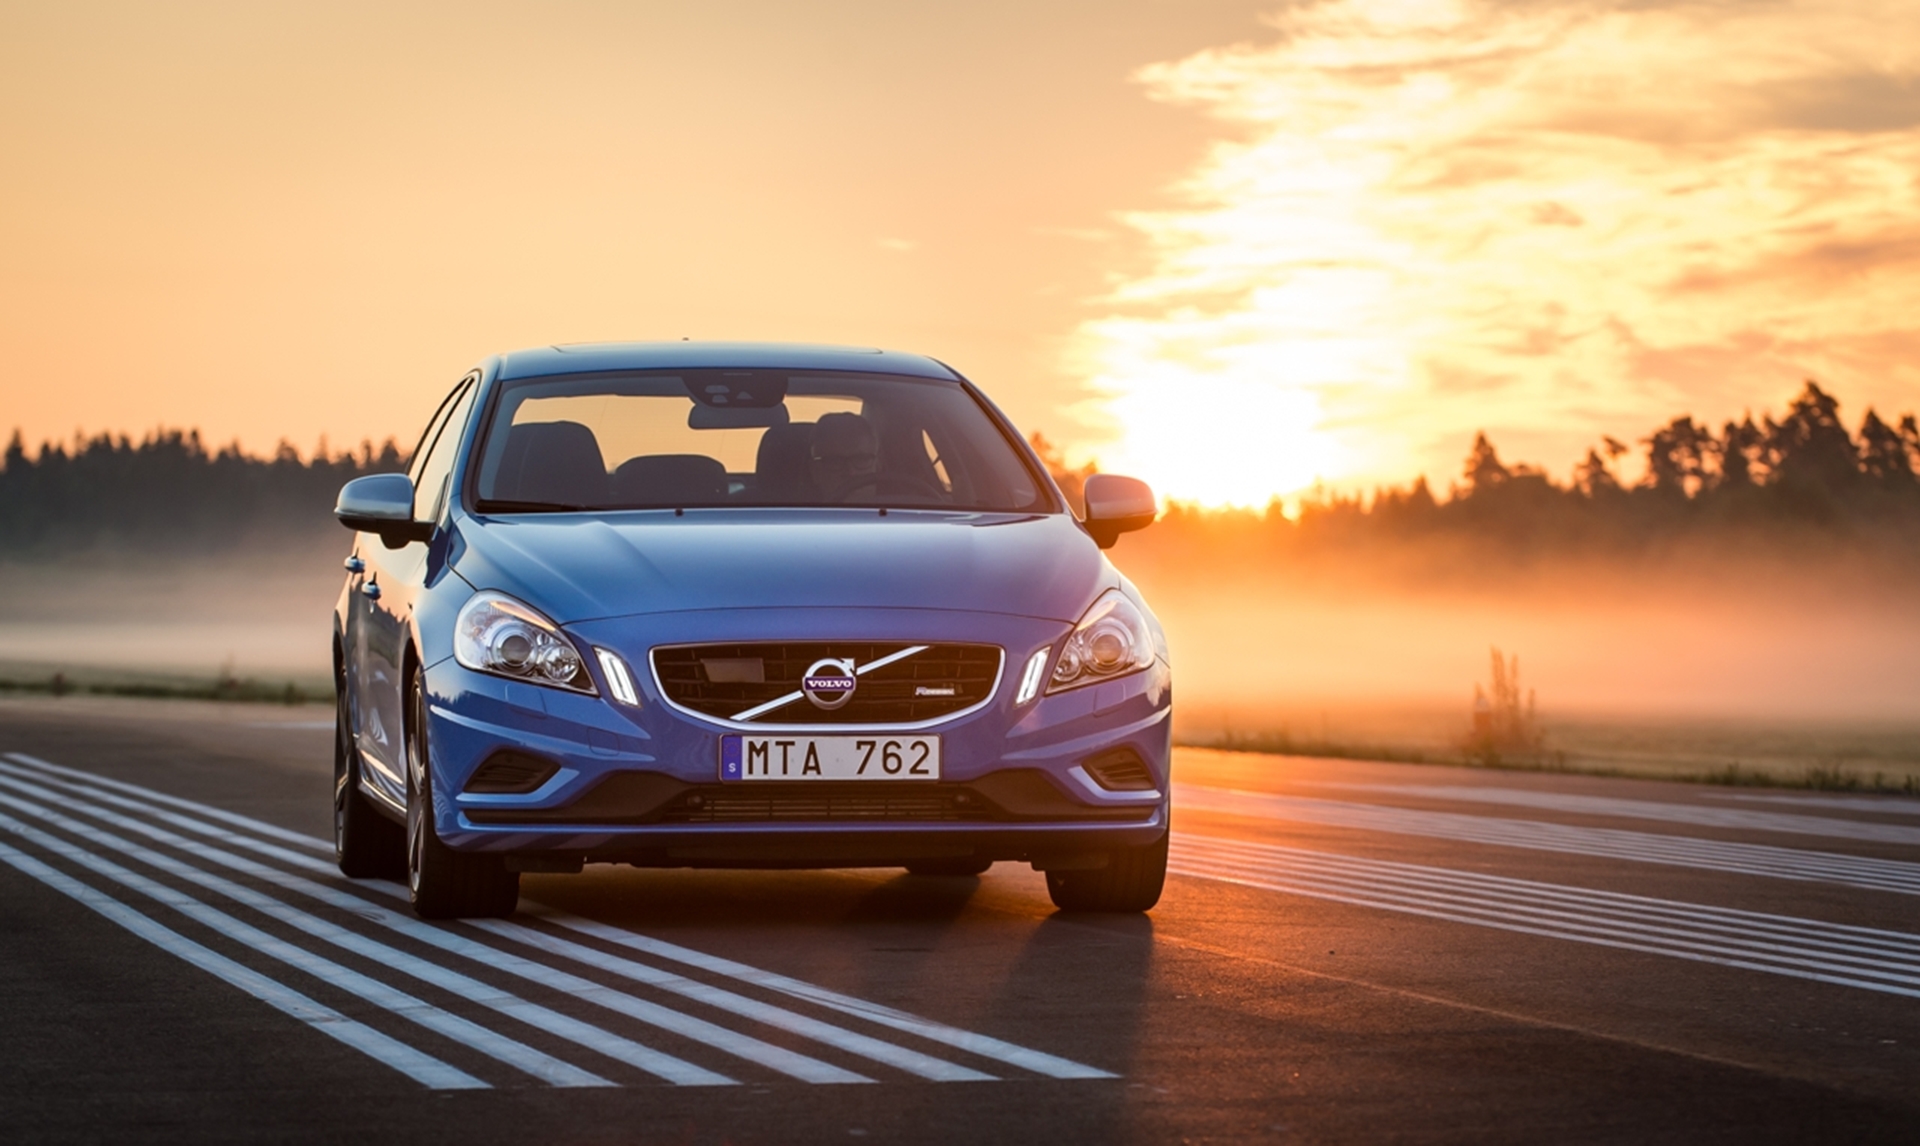 Volvo Cars – the leader in this new age of motoring